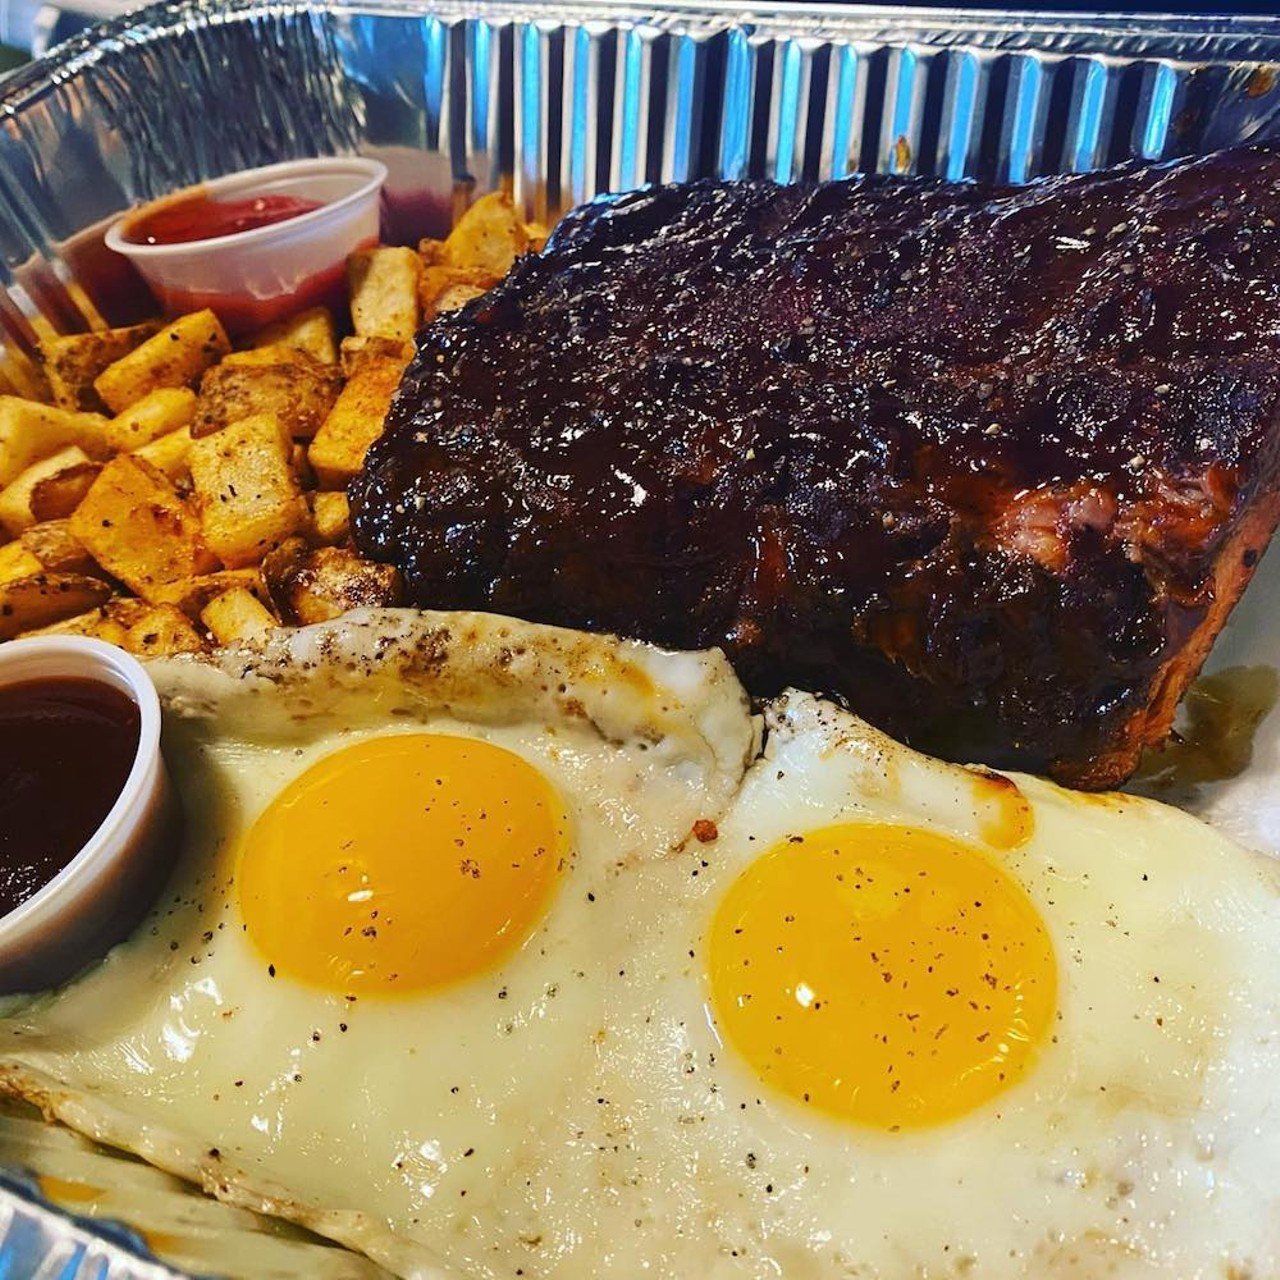 Four Pegs
1053 Goss Ave.
Four Pegs is known more for its reliably good beer selection and burgers, but they also have a solid brunch.
Featured in the photo is Pork Belly Hash &#150; pork belly burnt ends with fried potatoes topped with two fried eggs and BBQ drizzle.
